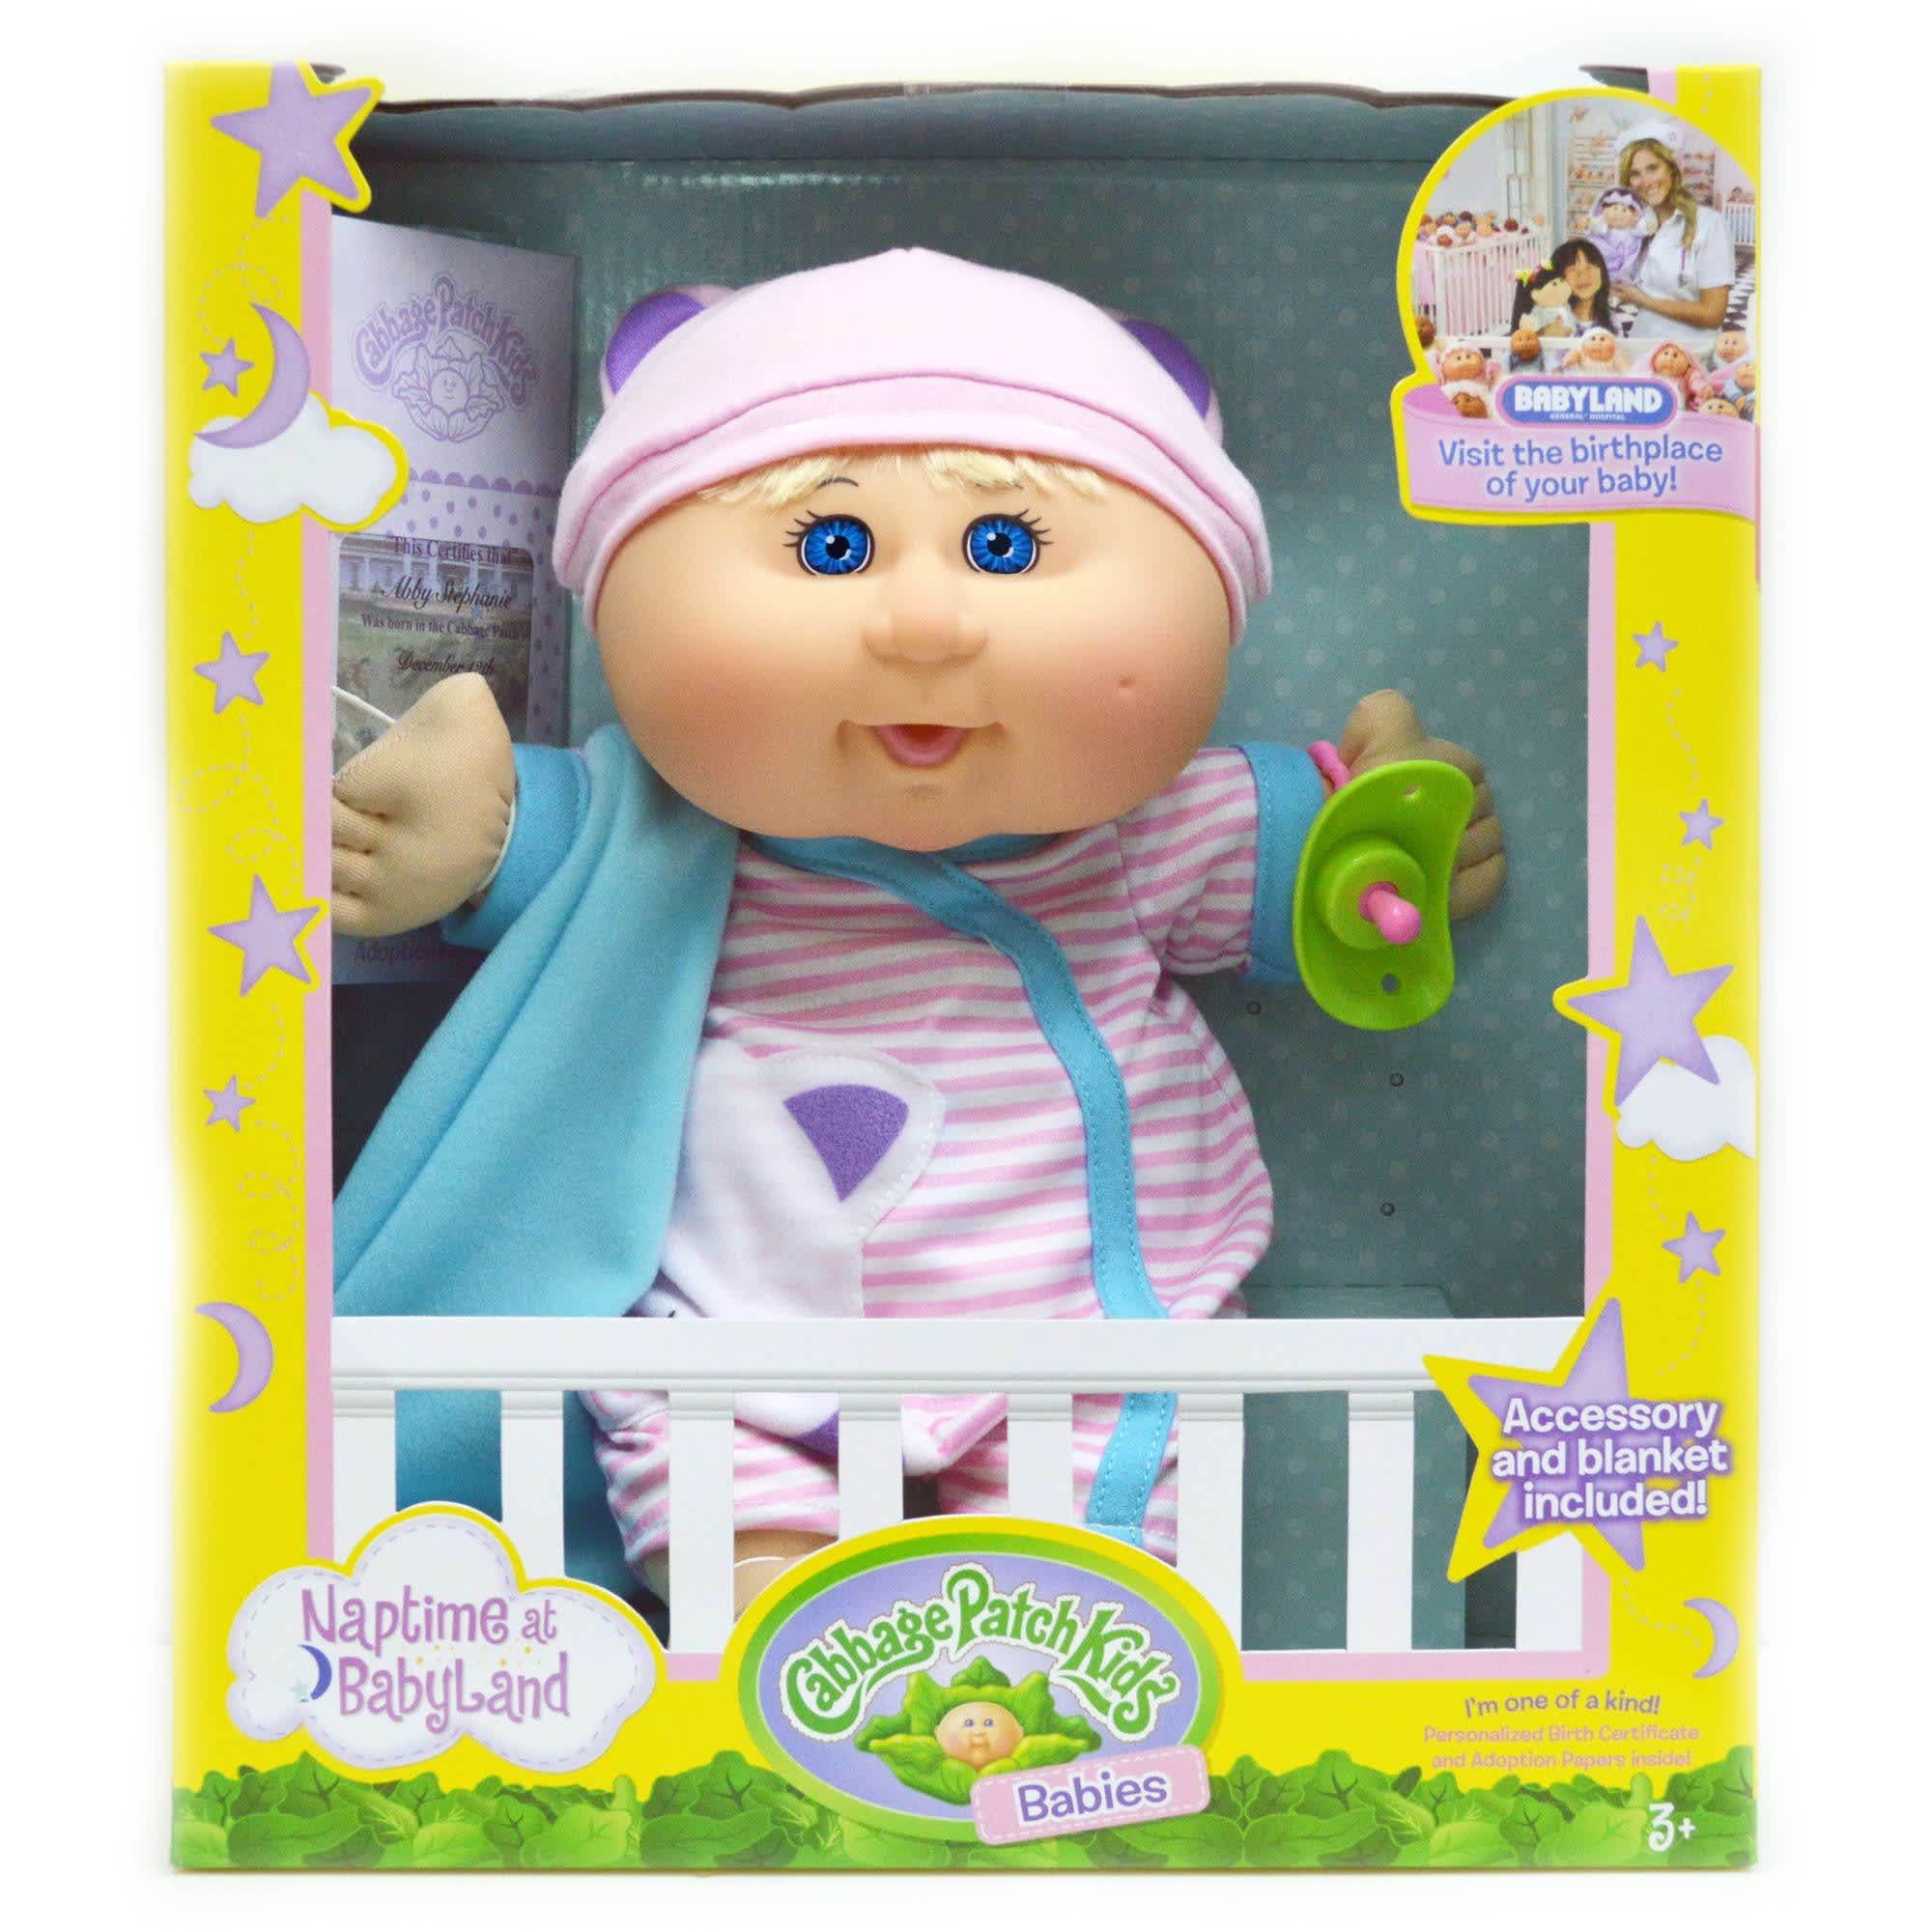 http://cdn.apartmenttherapy.info/image/upload/v1668383245/gen-workflow/product-database/cabbage-patch-kid-walmart.jpg